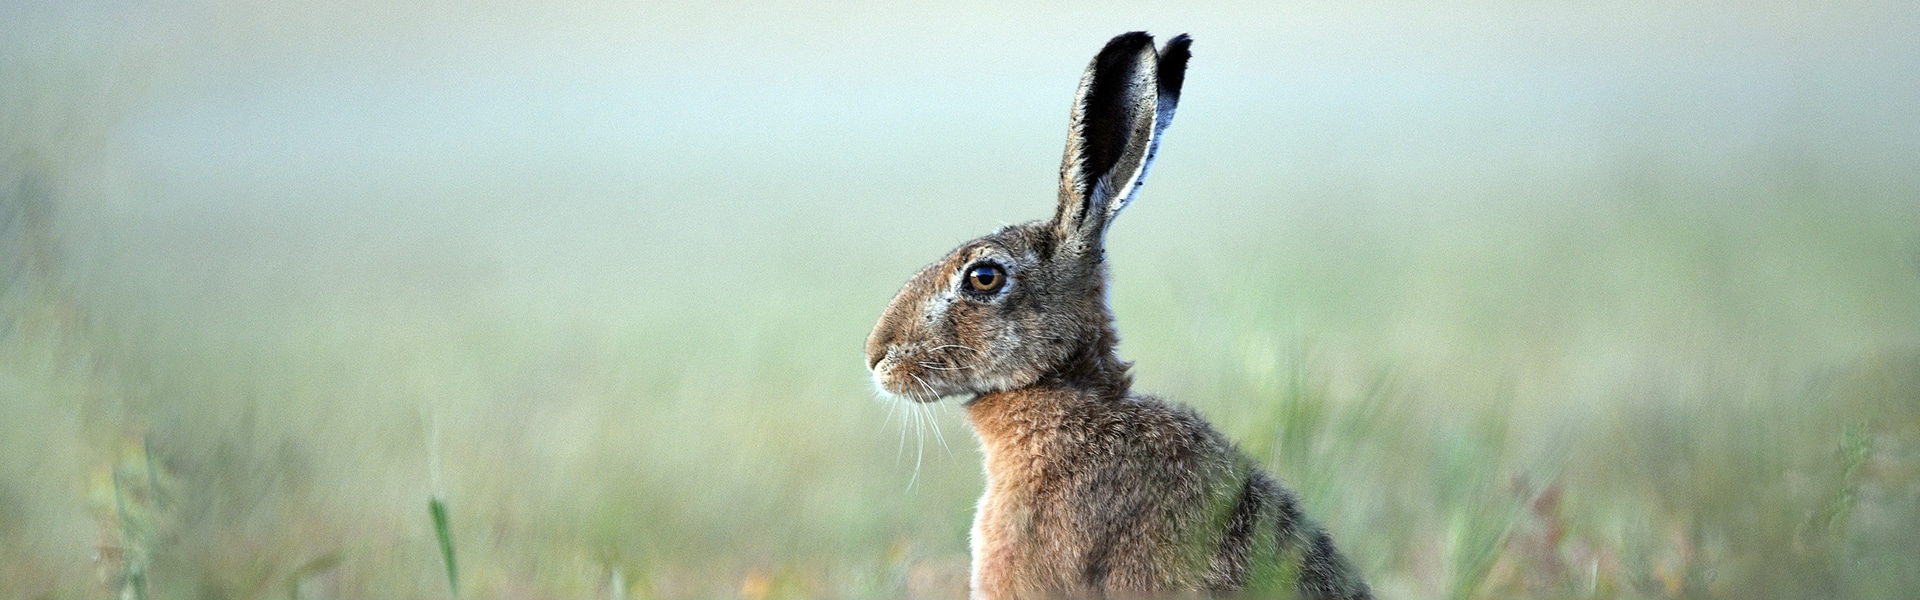 A brown hare